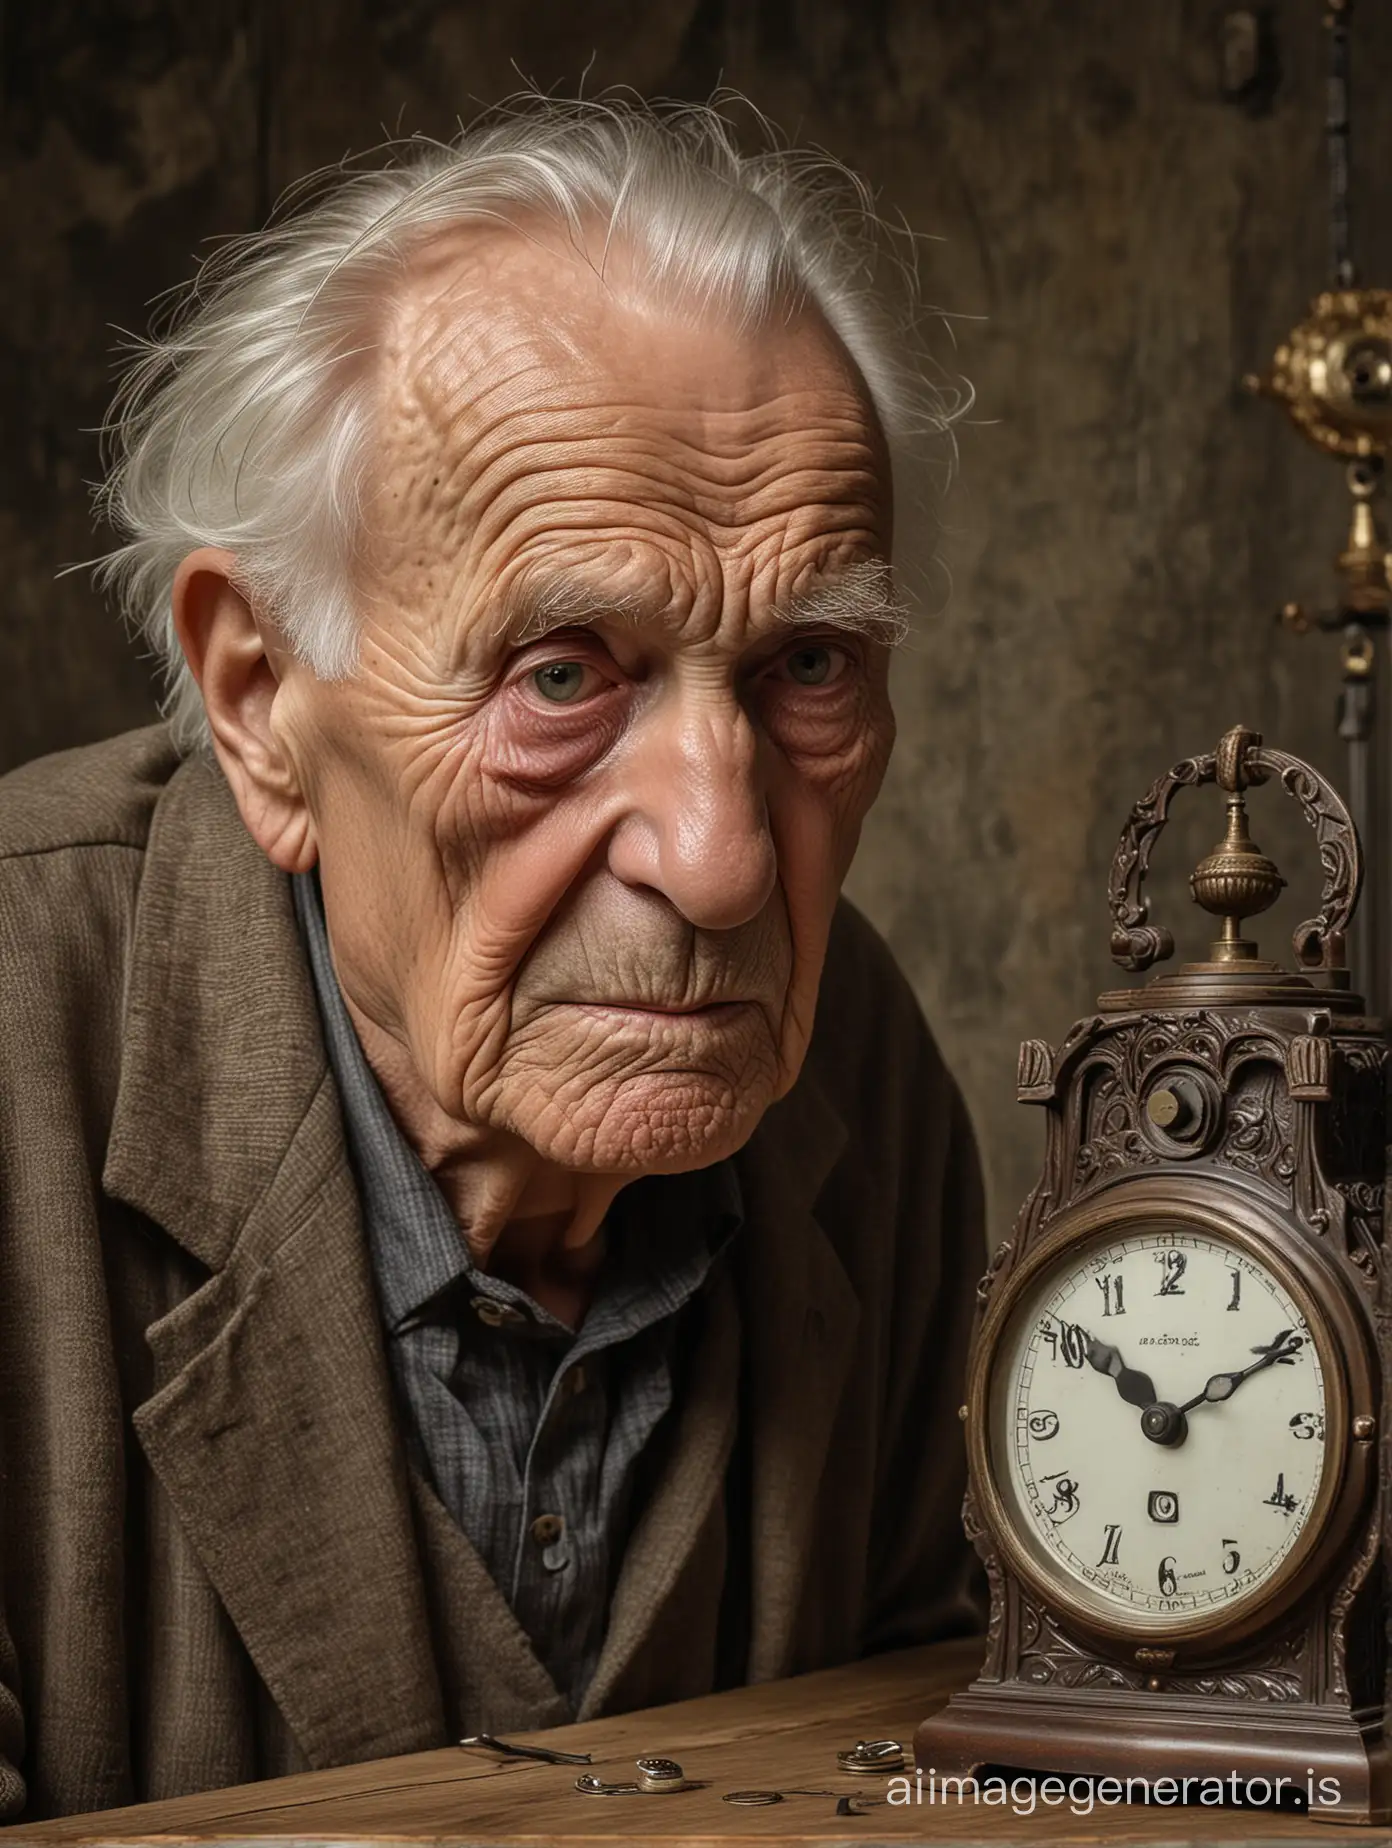 A very detailed portrait in a photo studio of a 90-year-old man with a wrinkled face, thinking about the meaning of life. In the background is an antique carved pendulum clock. The image is detailed and clear, suggesting it was taken with a high-quality camera such as a Nikon D850 using a portrait lens.